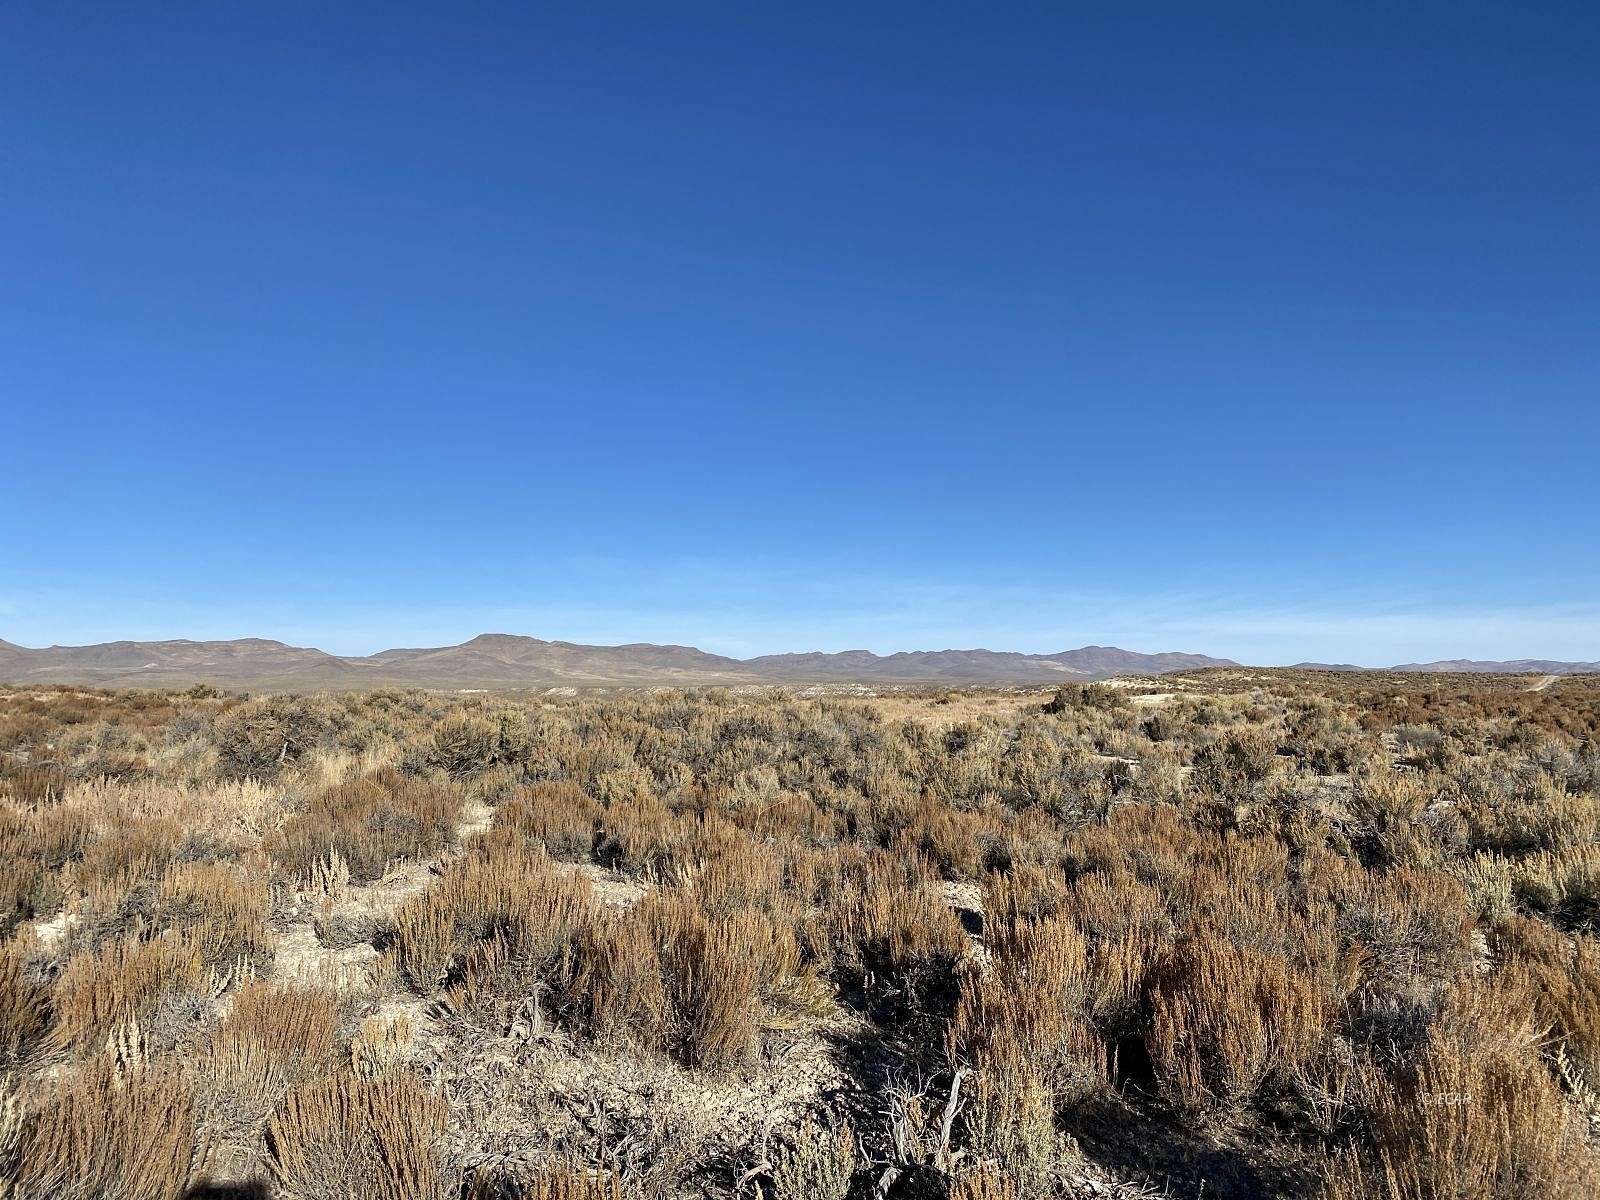 2.1 Acres of Residential Land for Sale in Ryndon, Nevada